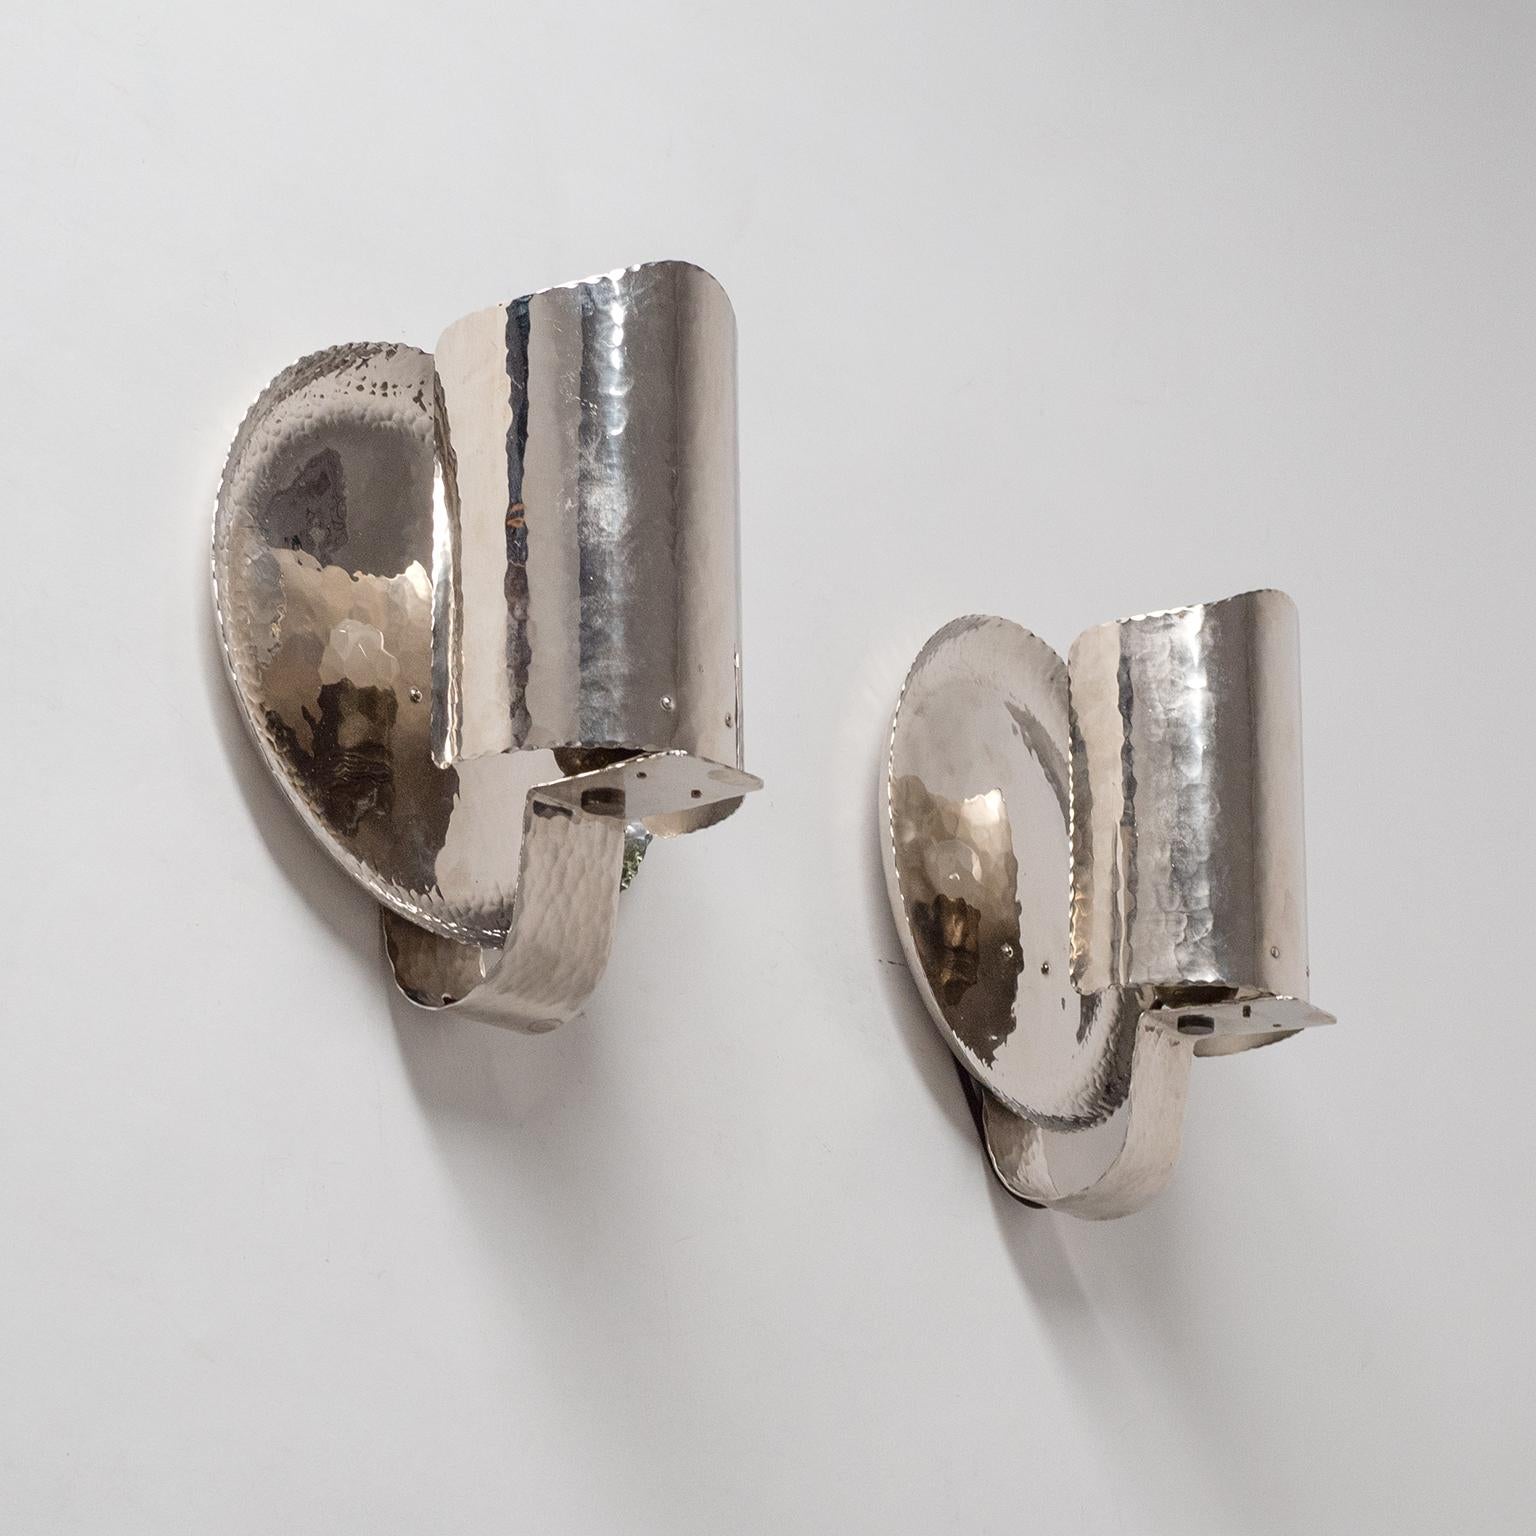 Very rare pair of nickel Art Deco sconces from the 1930s. Made entirely of nickel-plated hammered brass, even the edges are hammered. The uneven surface and edges provide a rare organic quality which contrasts nicely with the sheen of the nickel.